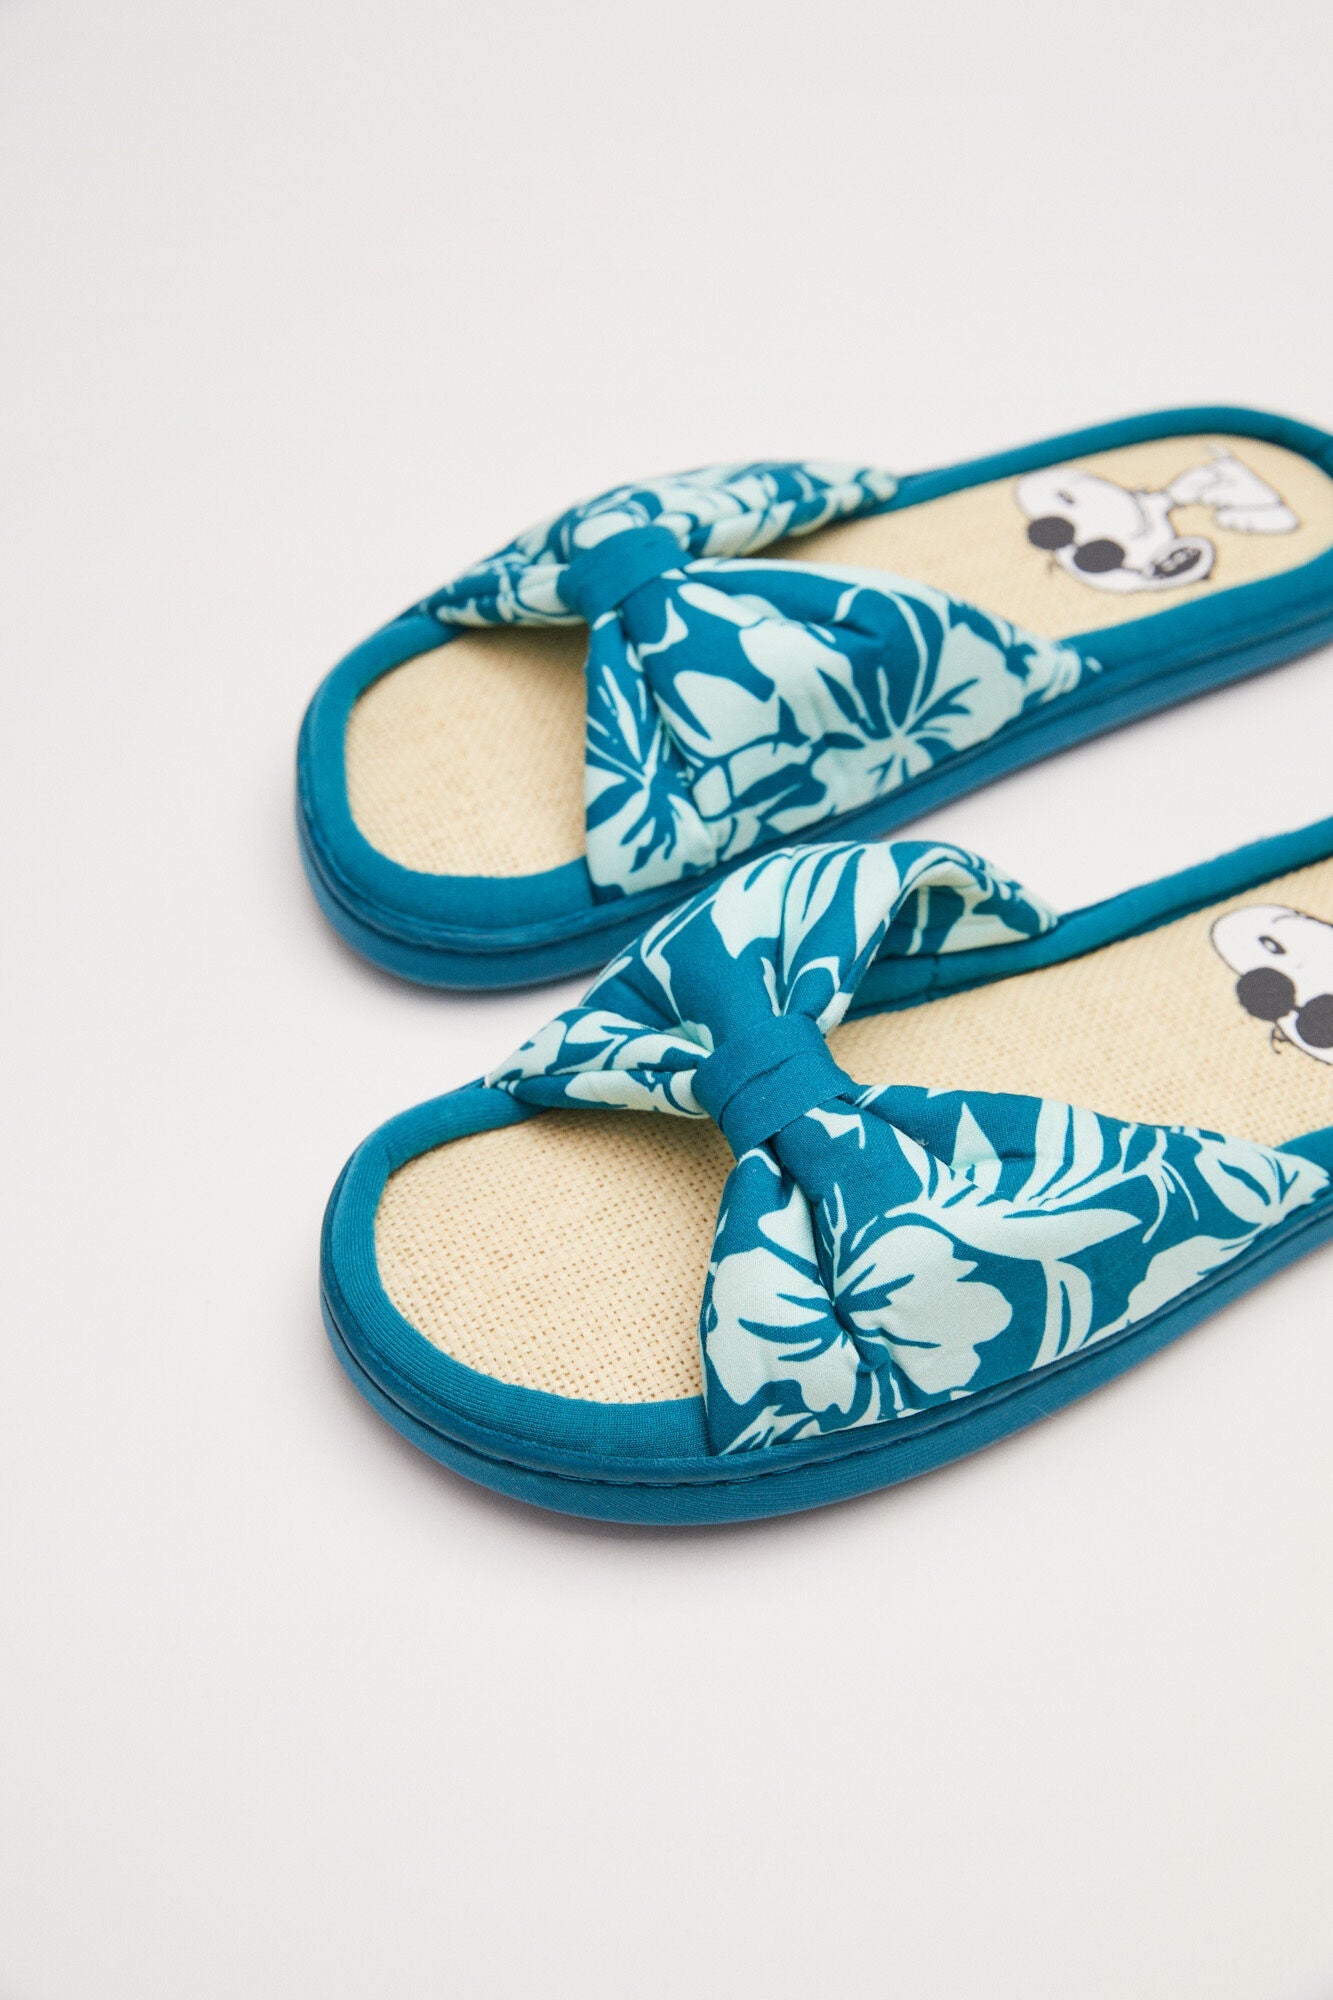 Snoopy Sandals